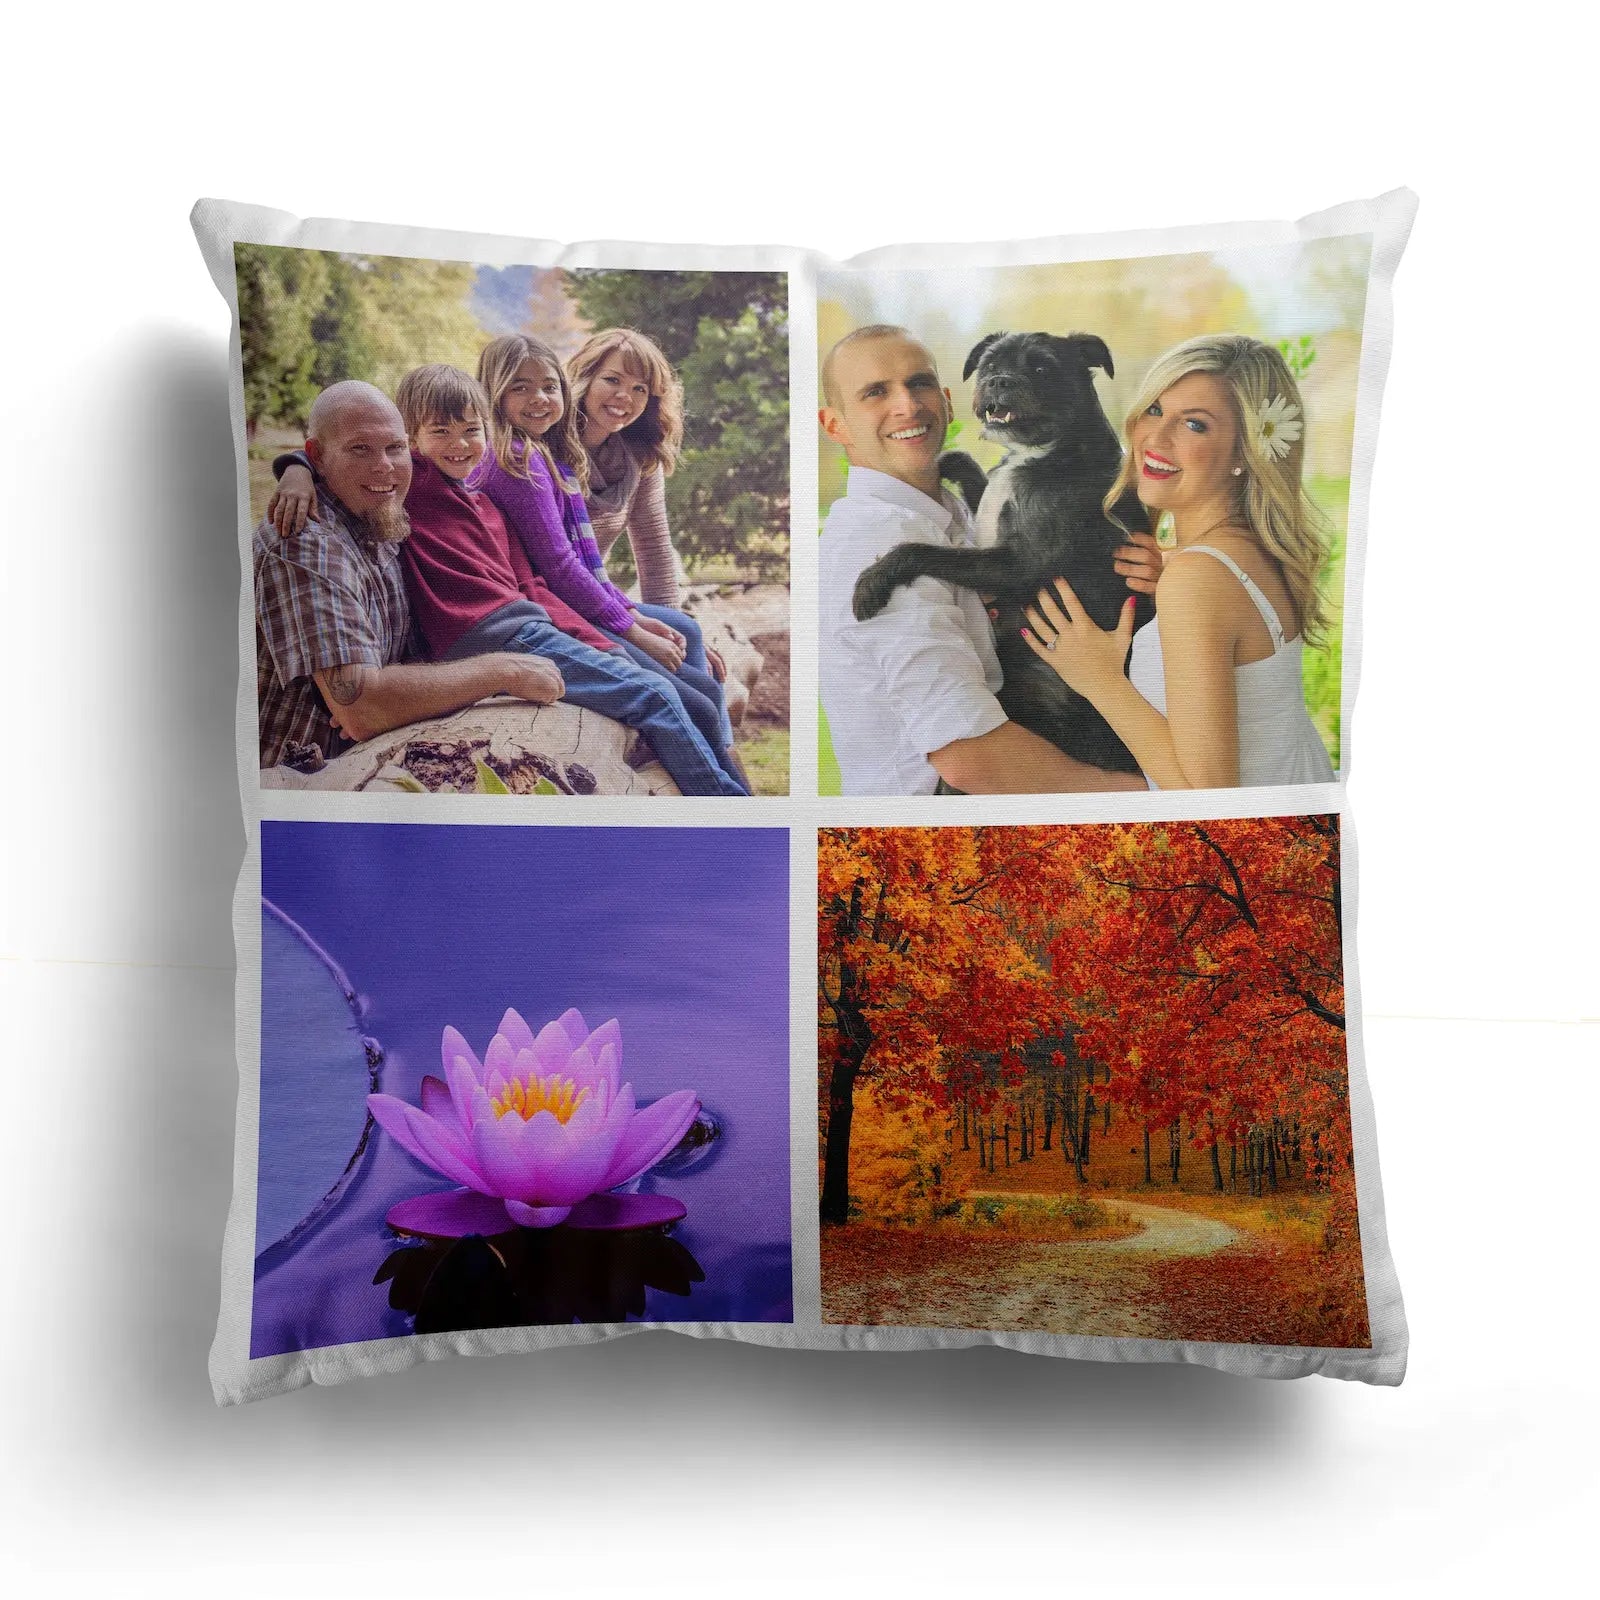 Personalised Collage Style  Cushion Cover  40x40cm  Photo Cushion - 4 Images - CushionPop